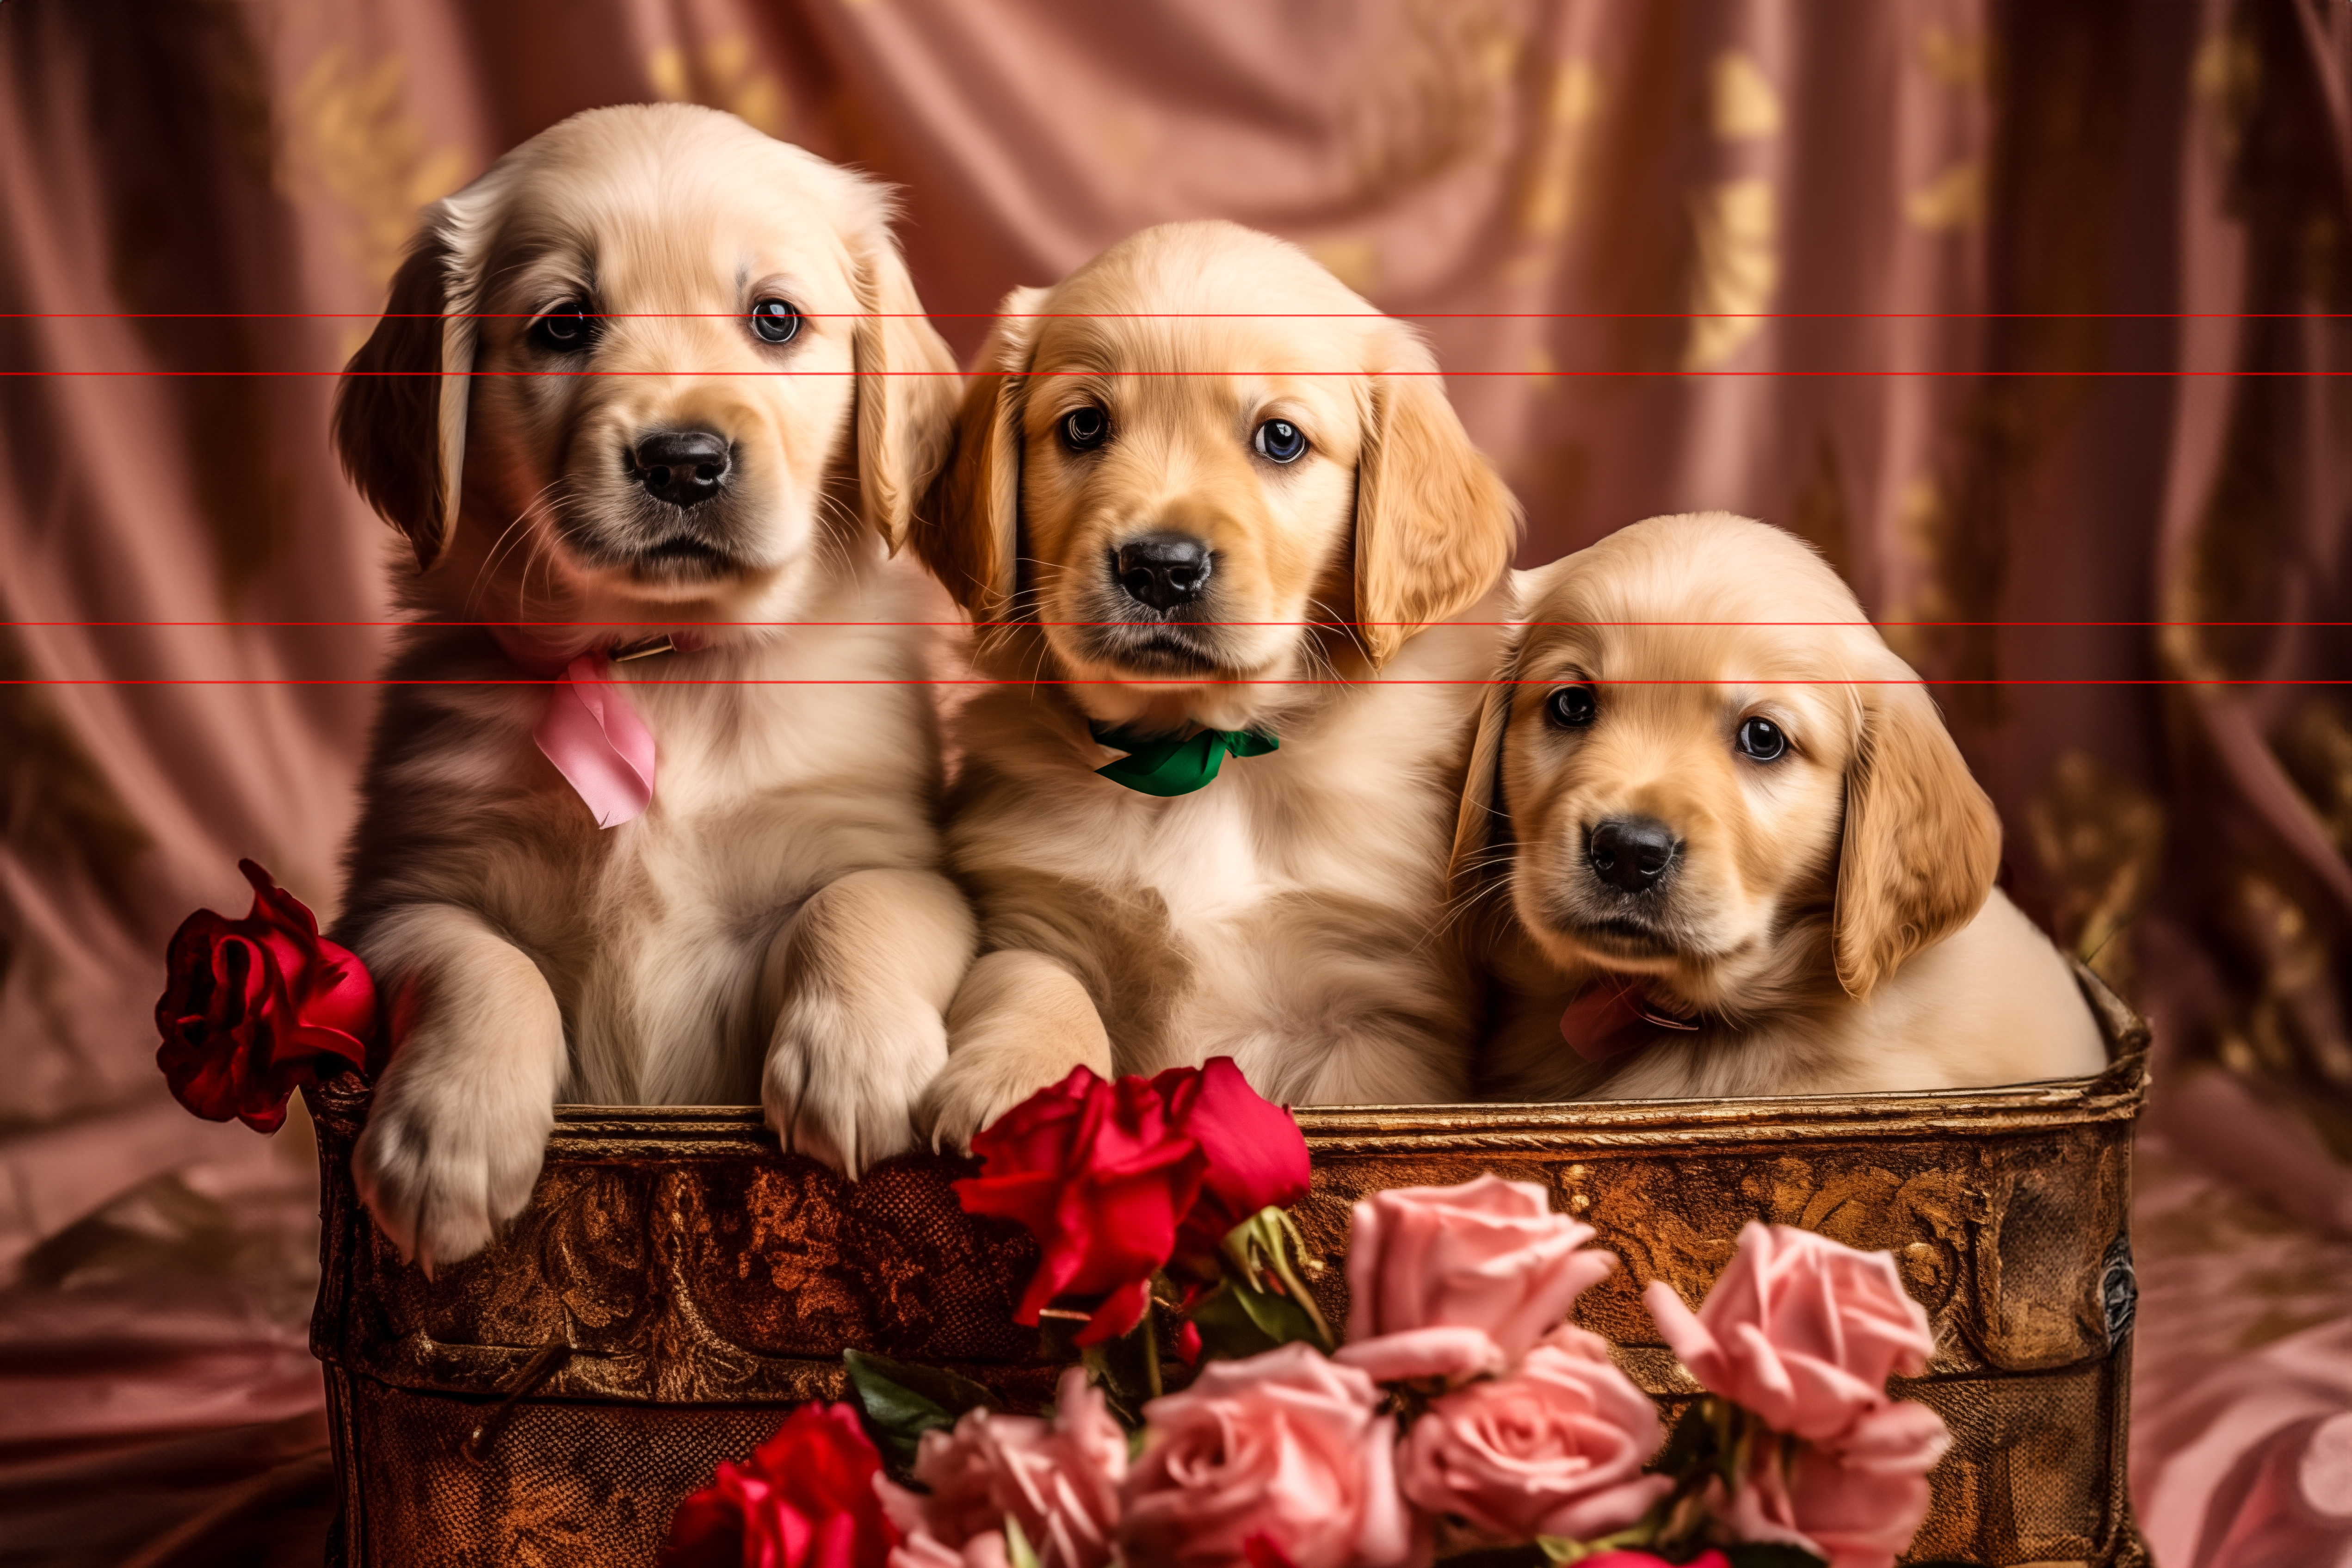 3 Golden Retriever Puppies with Roses